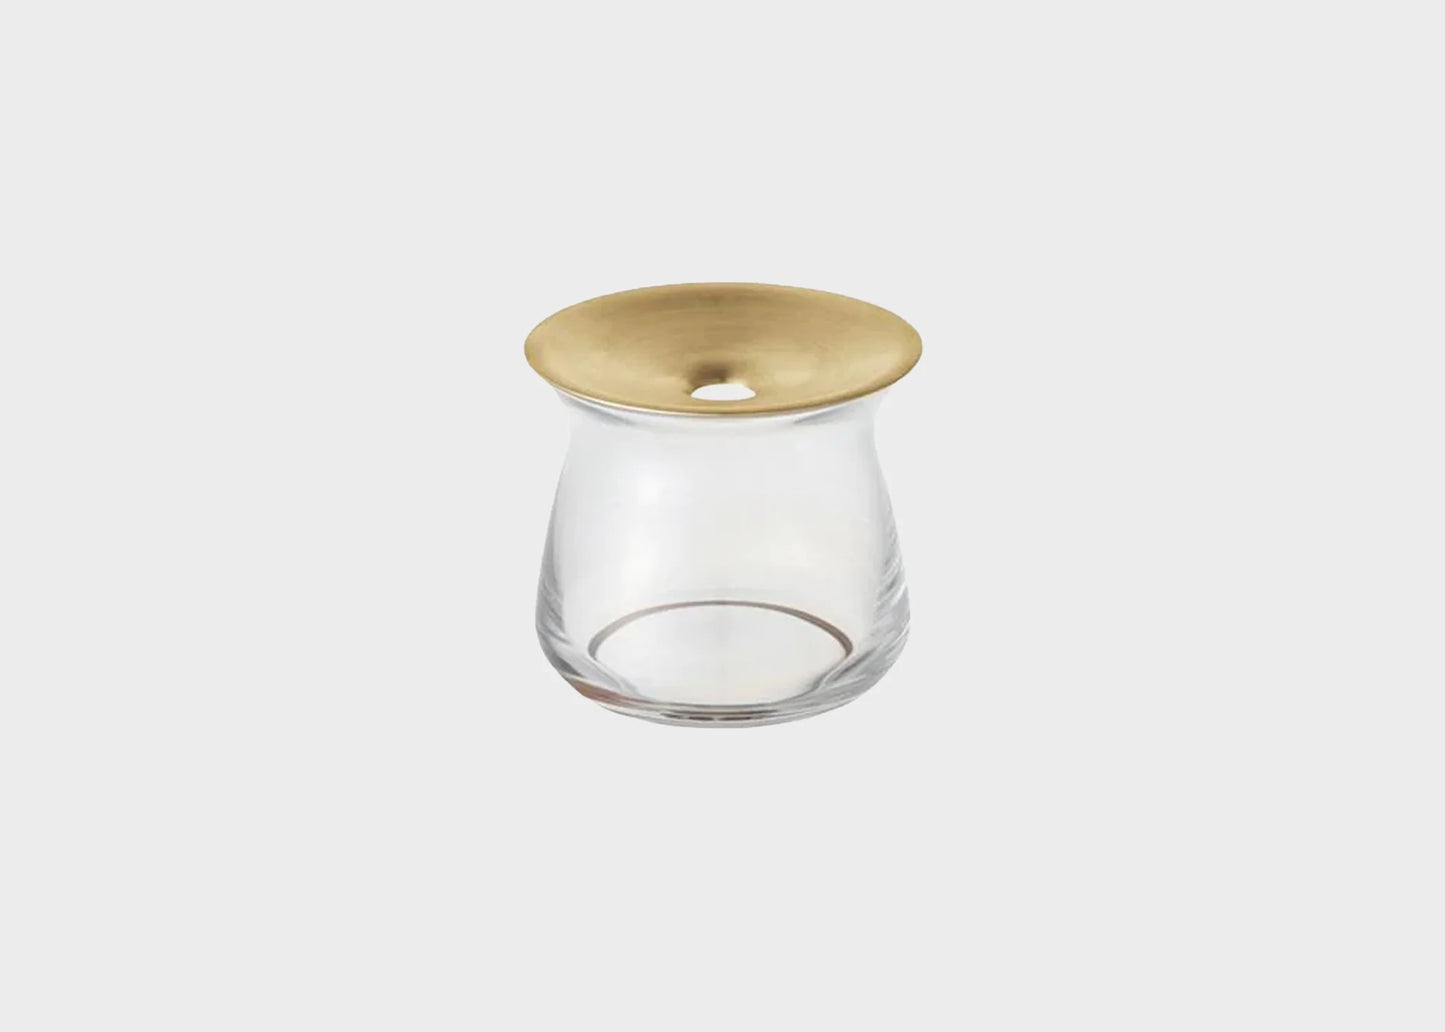 A small LUNA vase made of glass with a gold brass lid and a hole for inserting flowers.